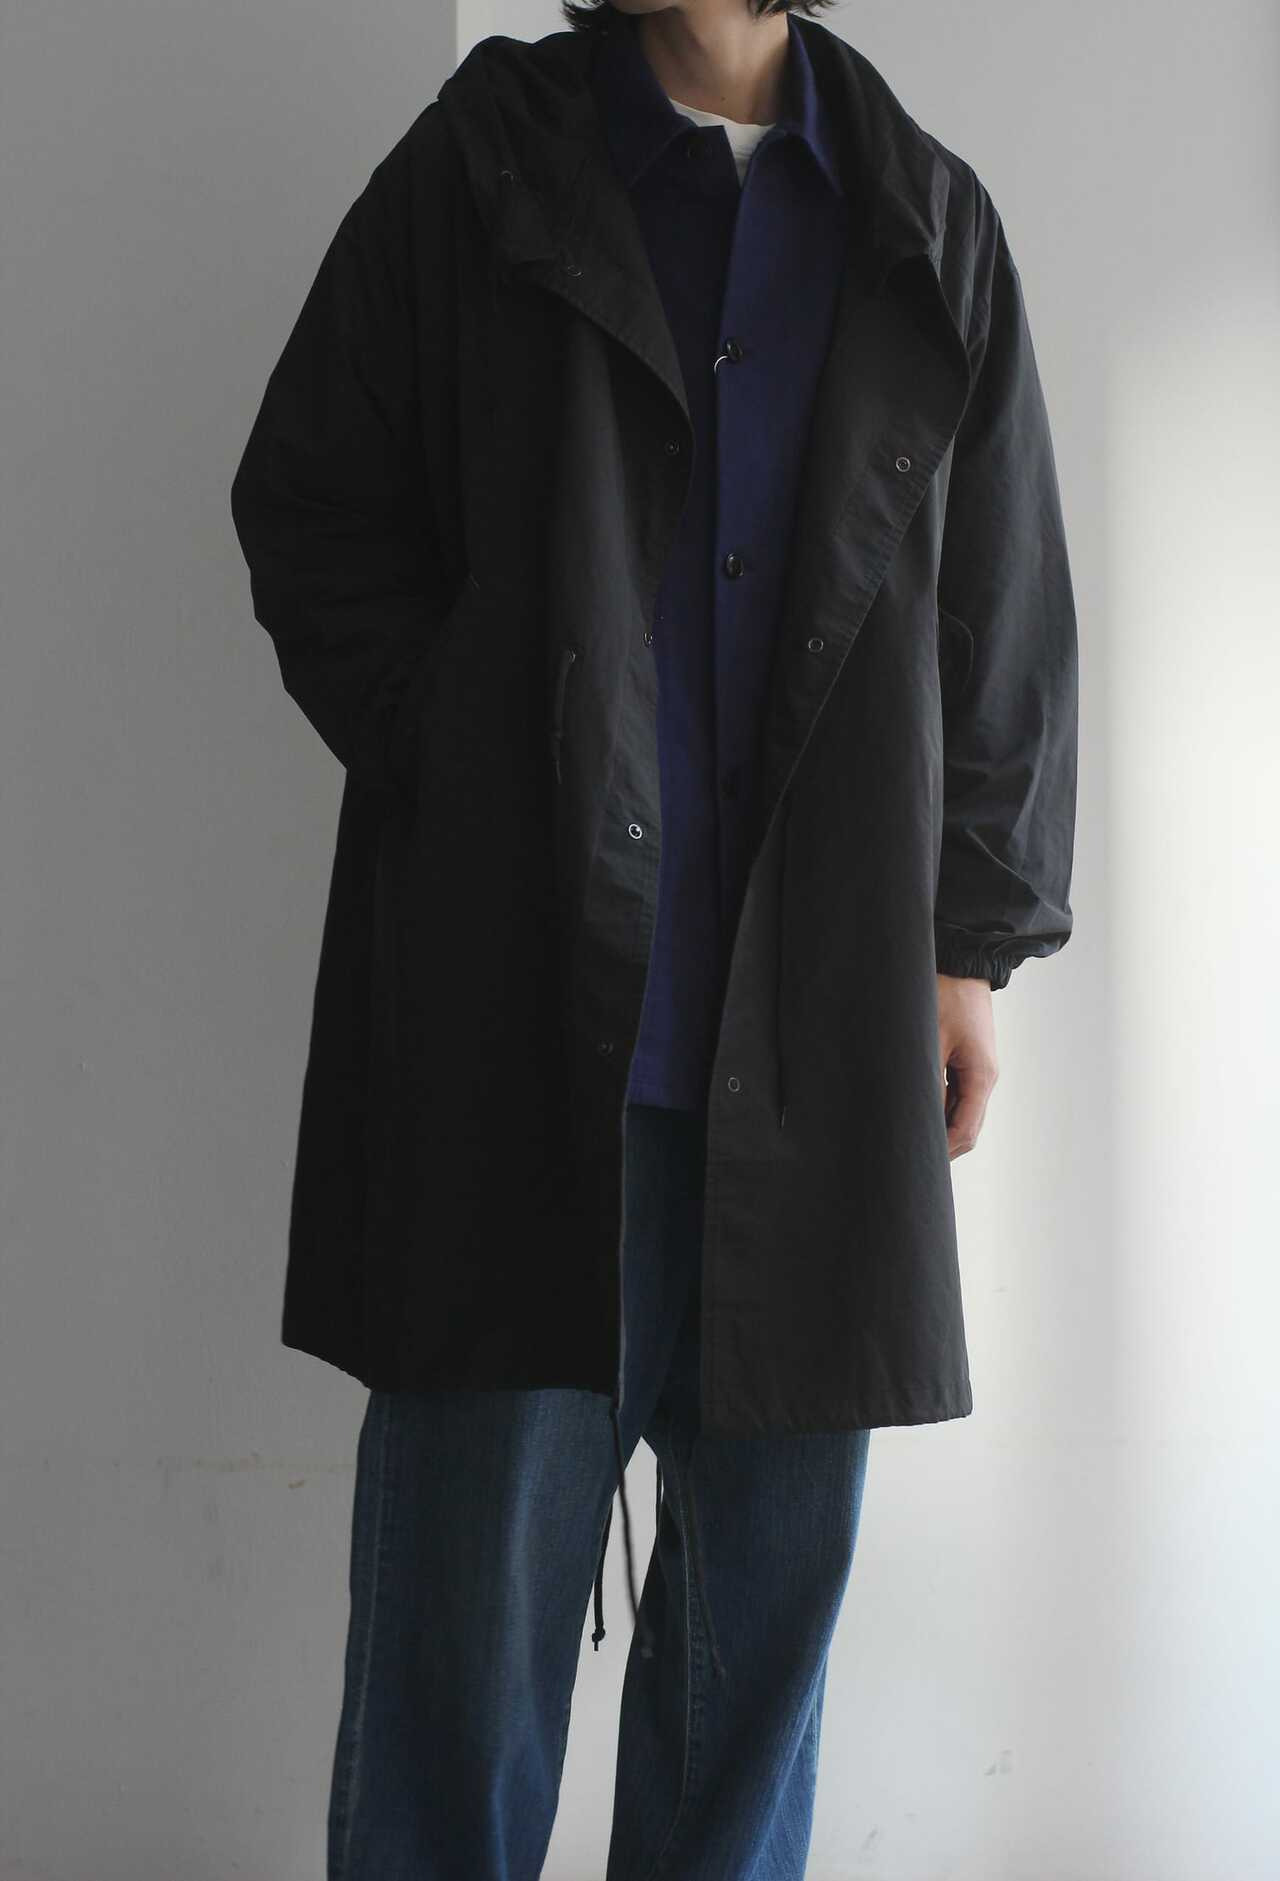 PORTER CLASSIC - Weather Military Coat 3 Colors